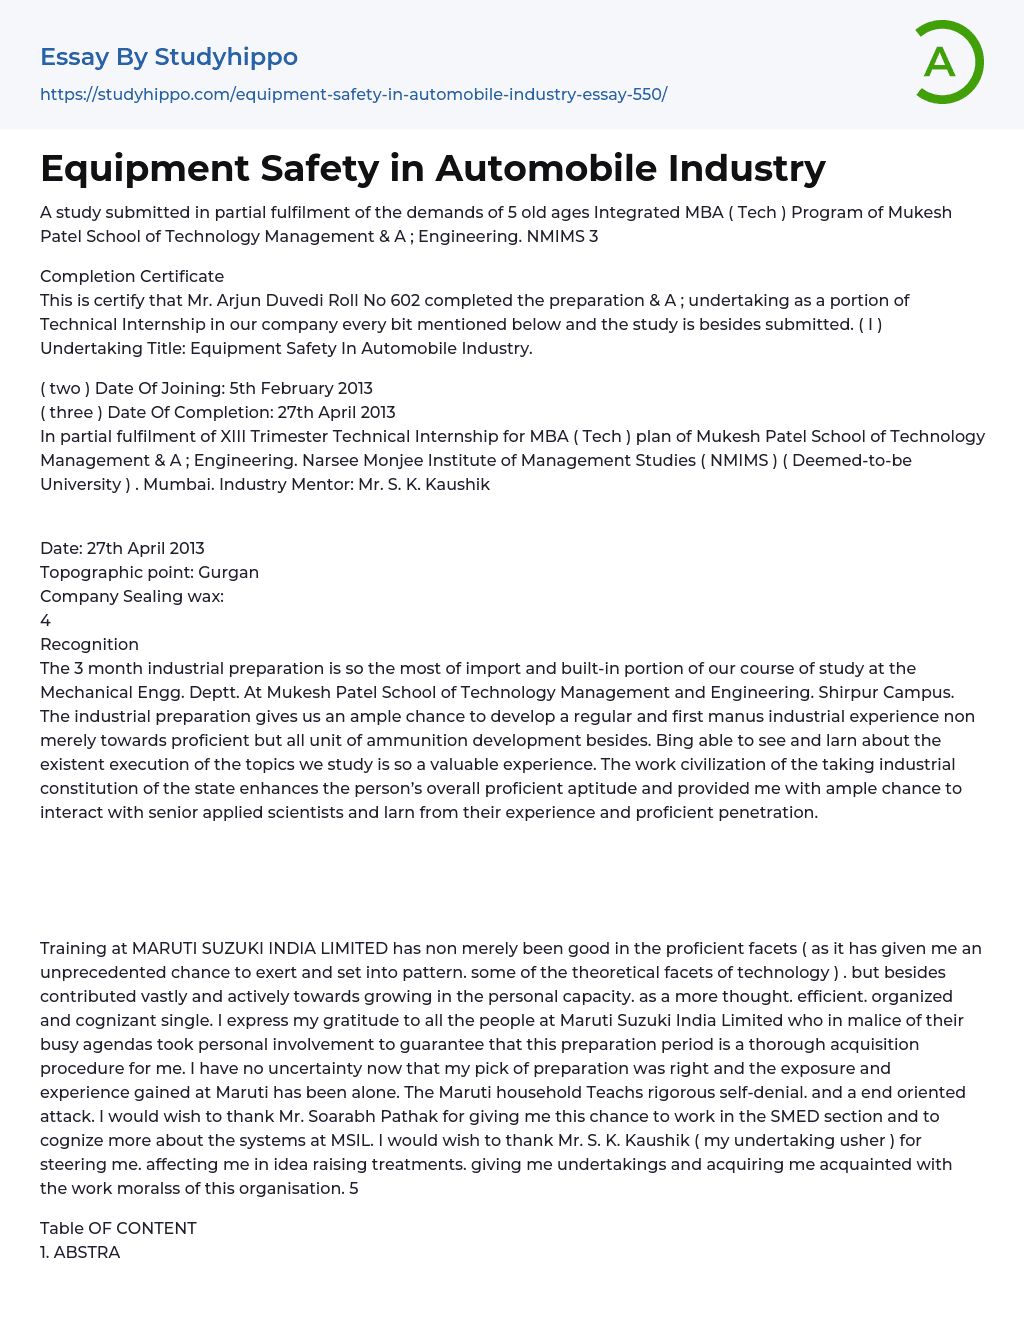 Equipment Safety in Automobile Industry